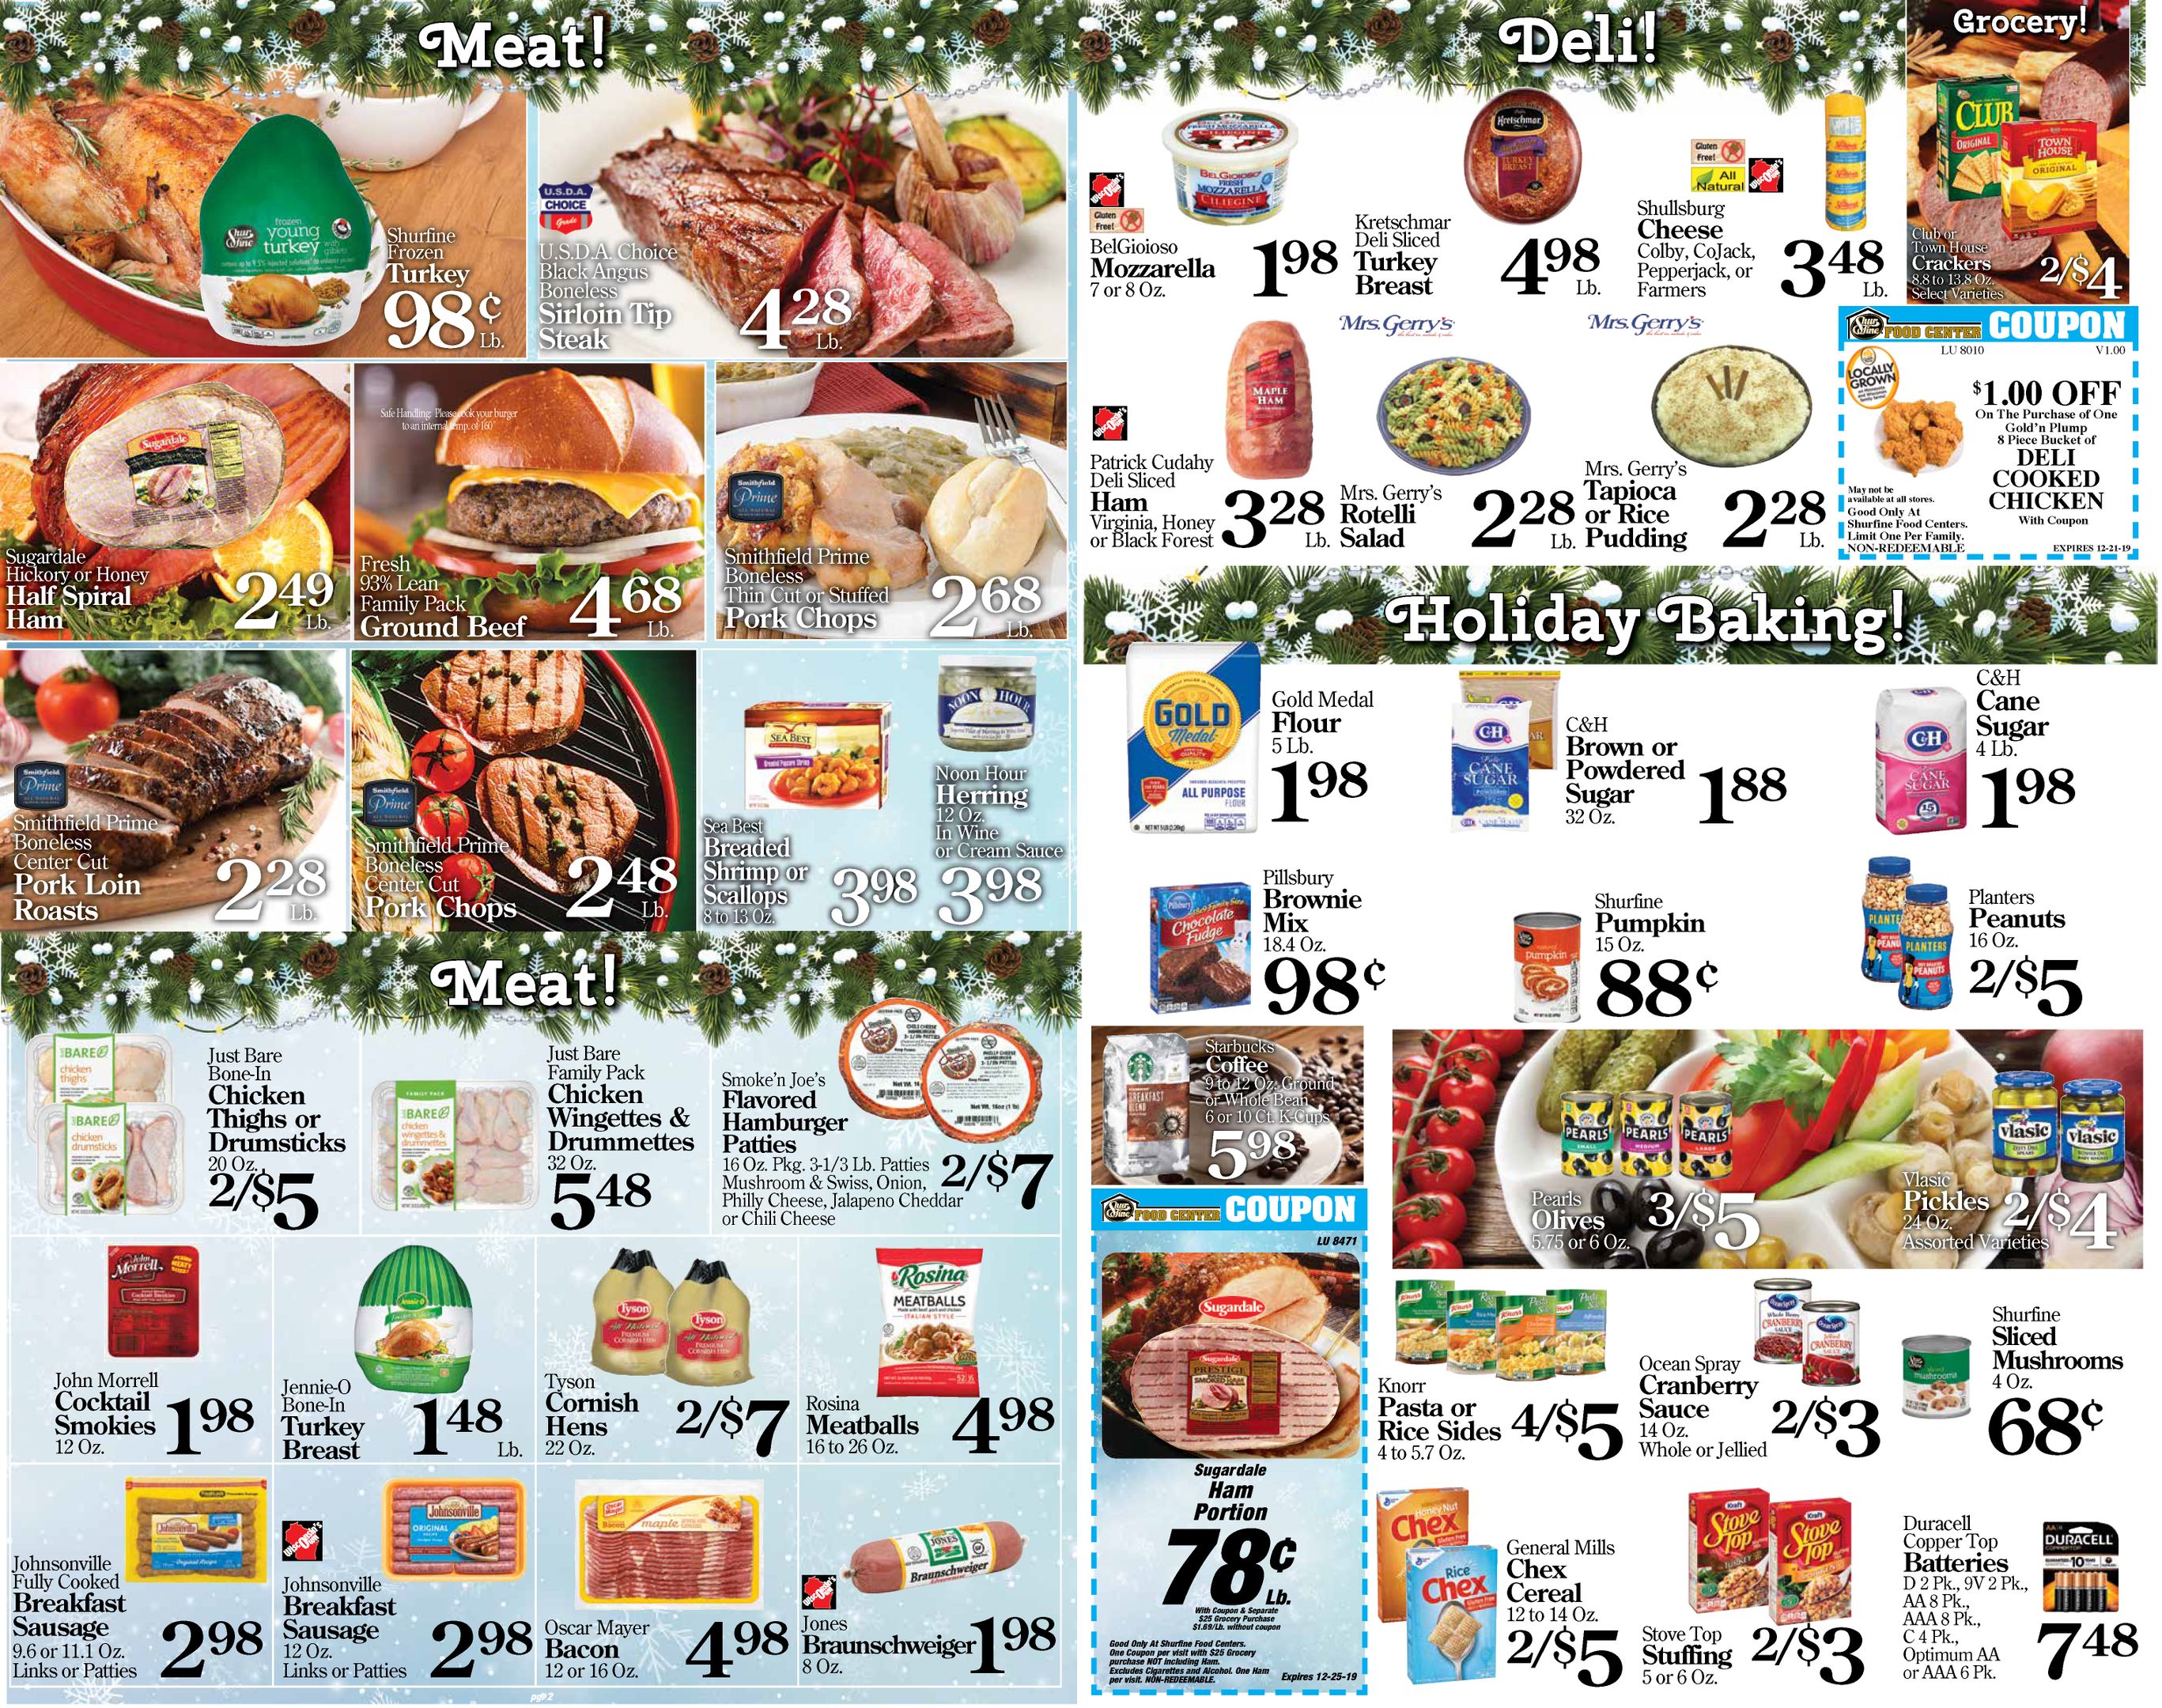 Pritzl's Weekly Ad page 2-3